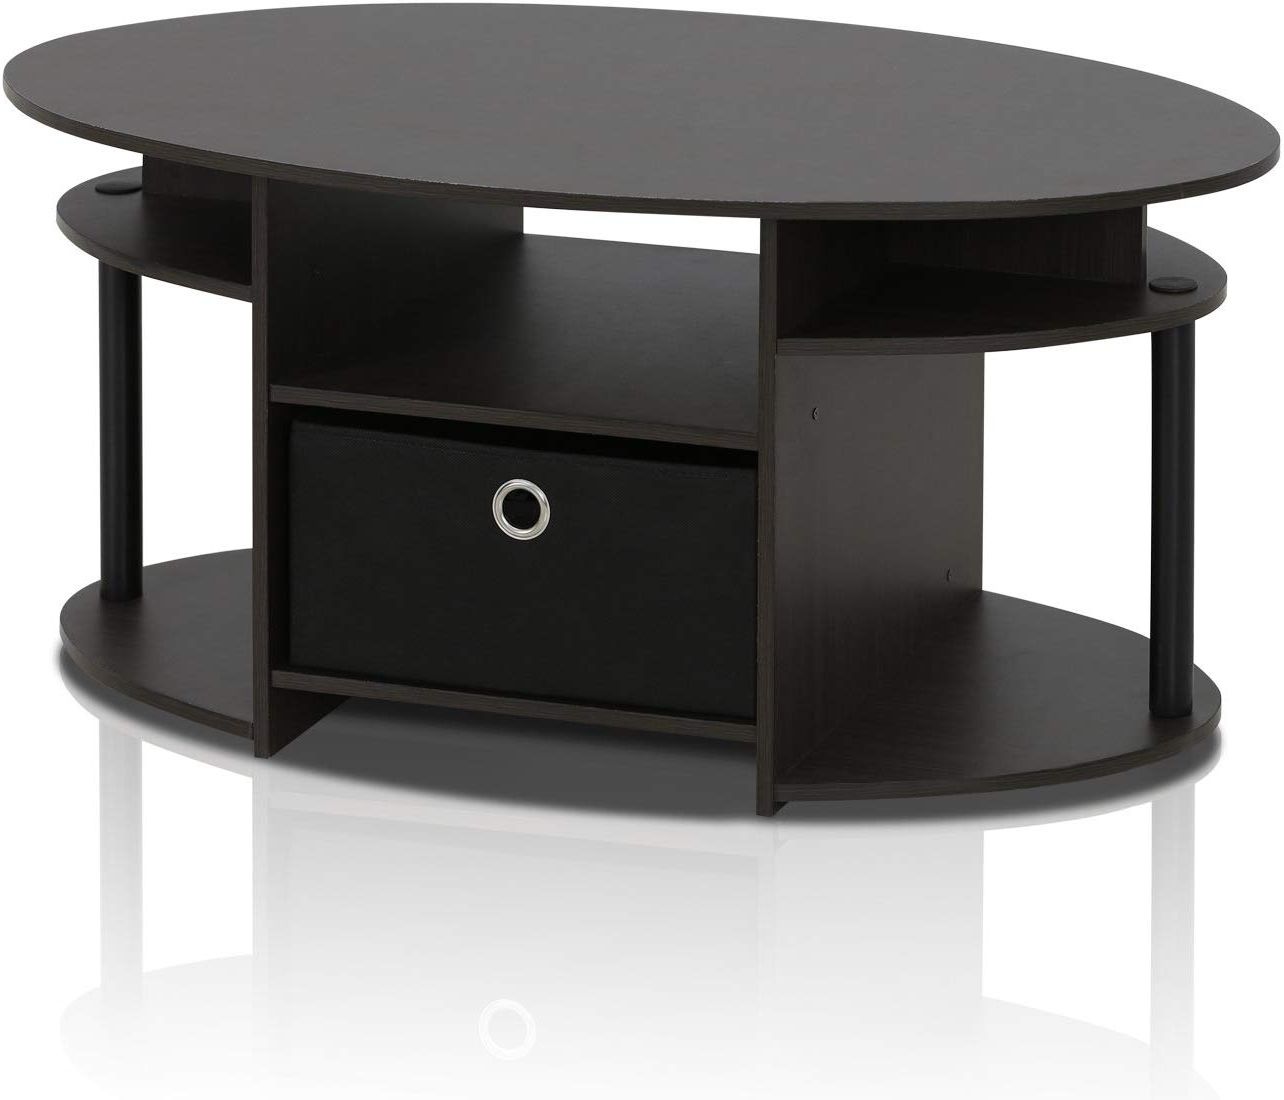 Best And Newest Aged Black Coffee Tables Inside Black Coffee Table With Storage, Wood Look Accent (View 11 of 20)